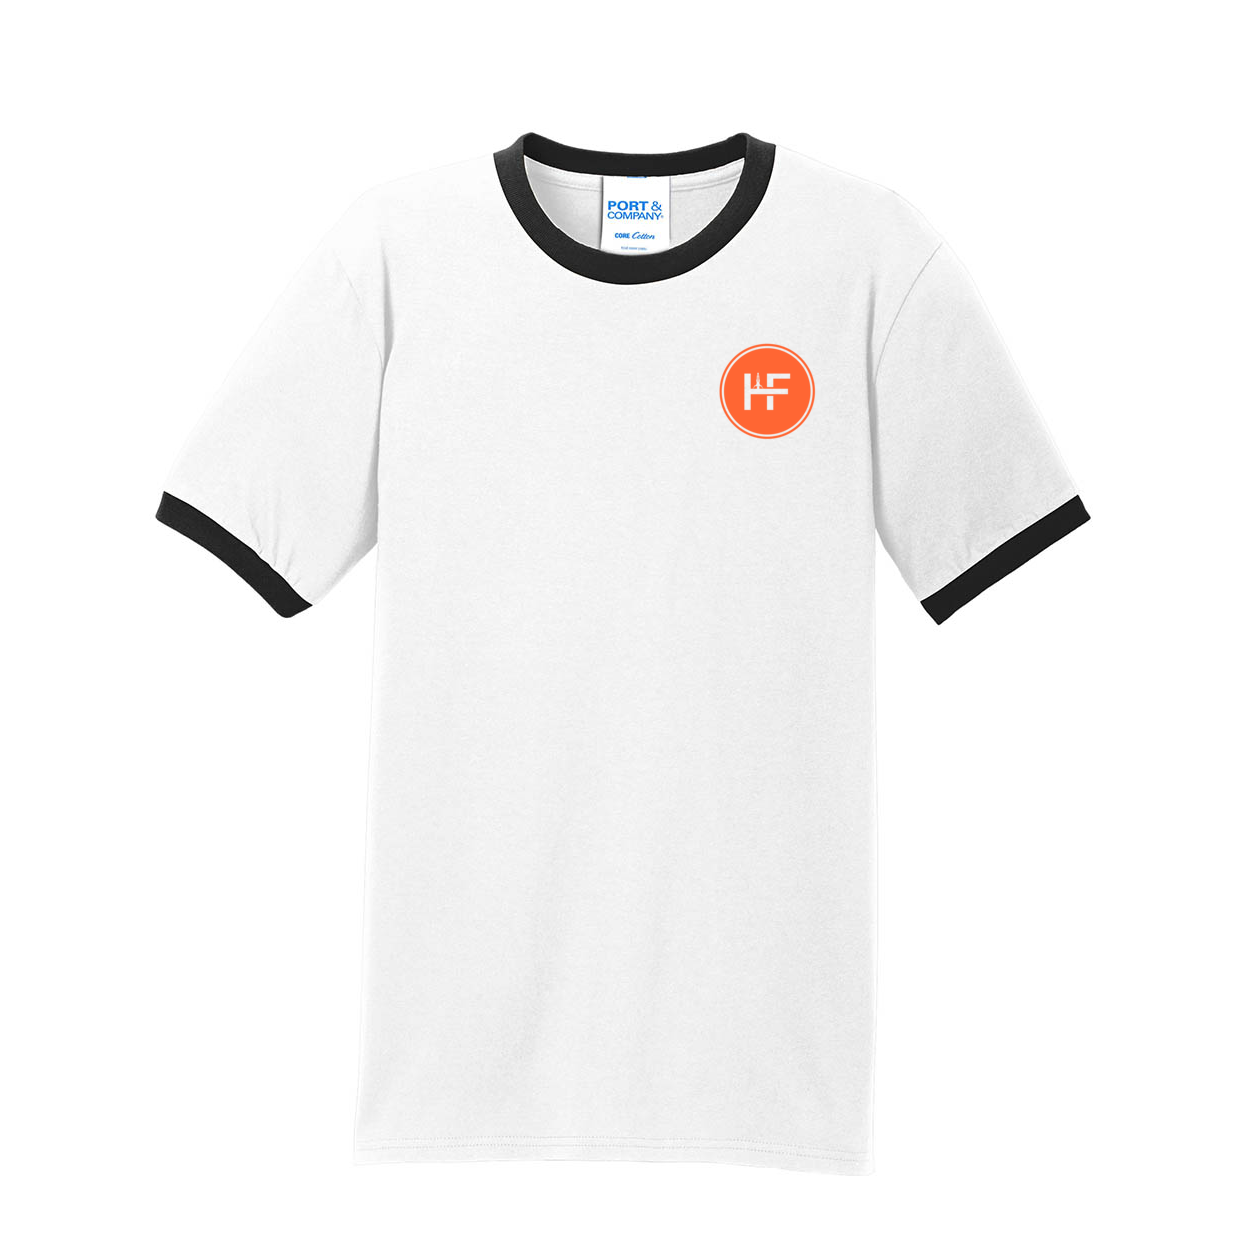 Just Do It Today Port & Company® Cotton Tee